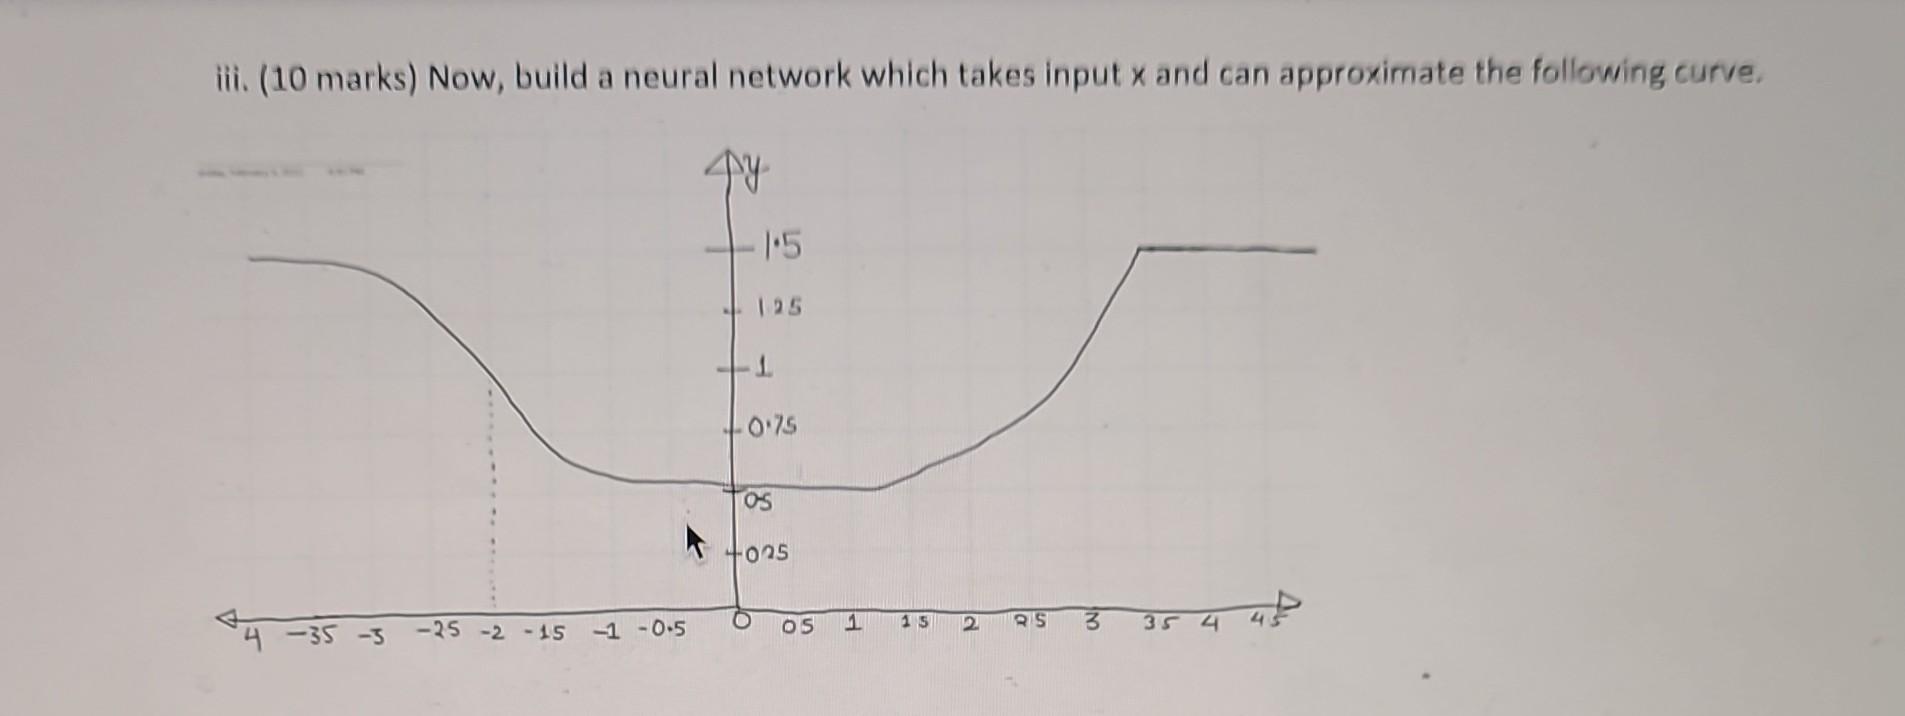 iii. (10 marks) Now, build a neural network which takes input x and can approximate the following curve.